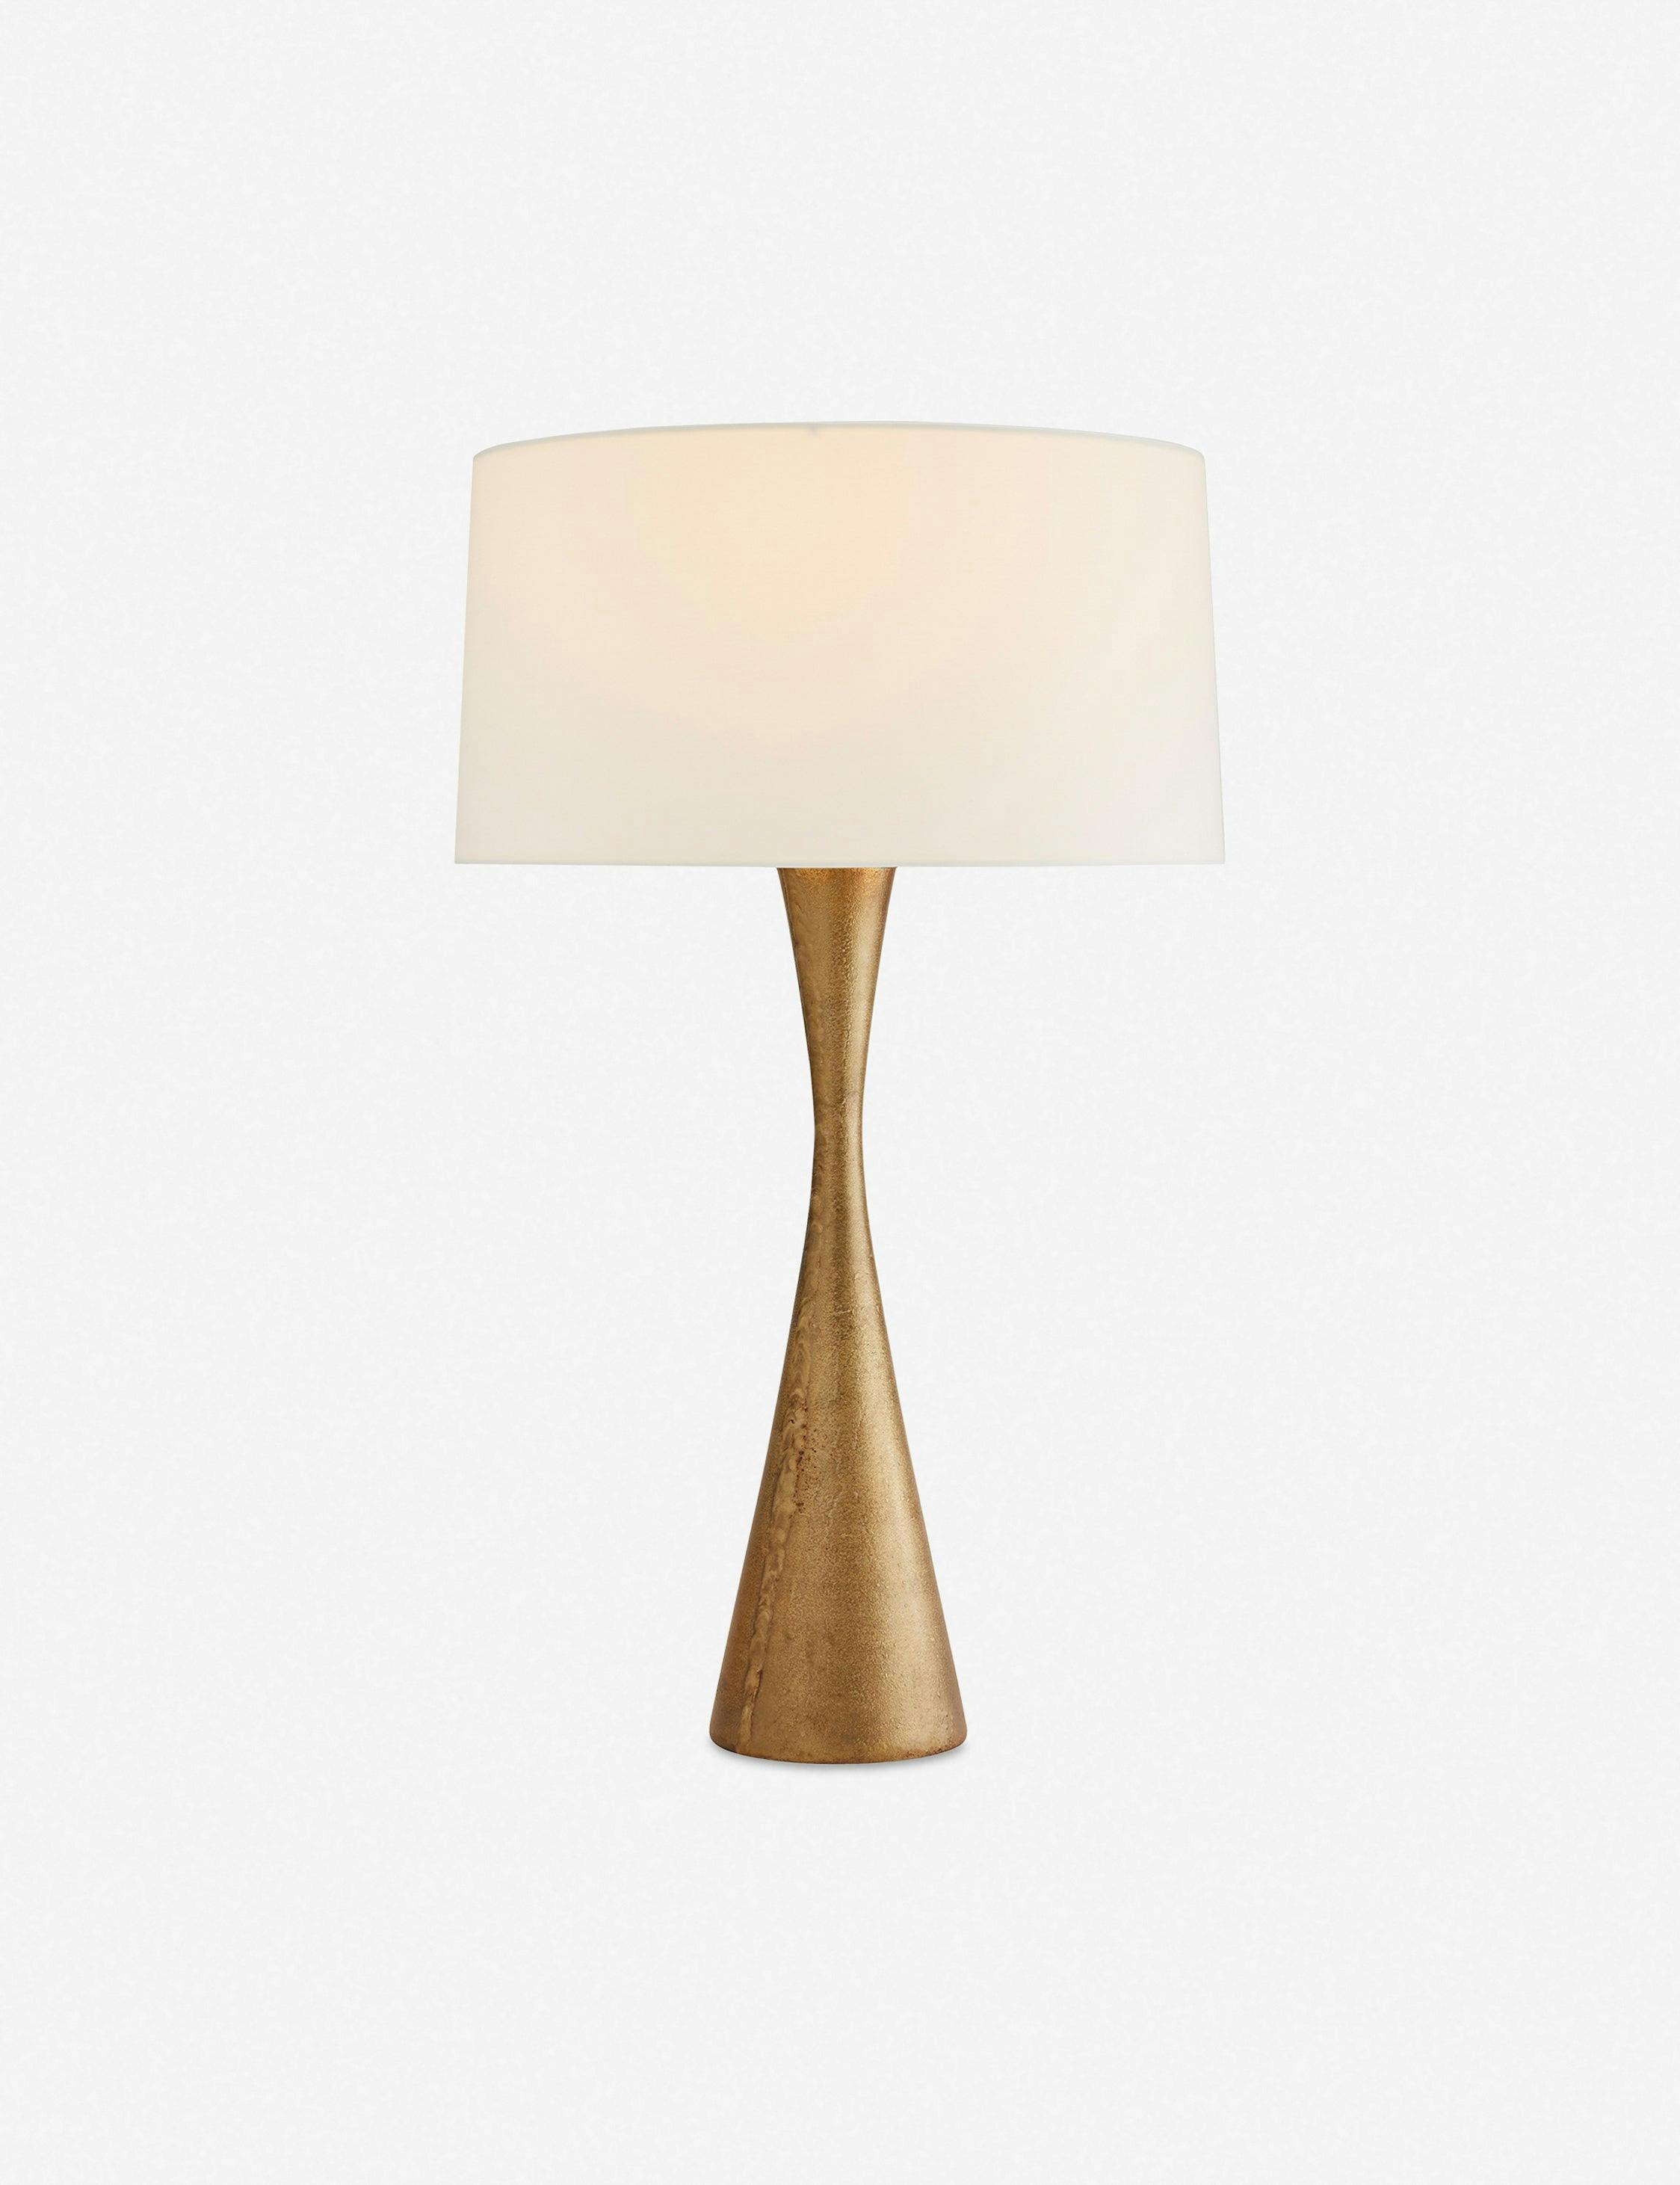 Narsi Table Lamp by Arteriors - Antique Brass